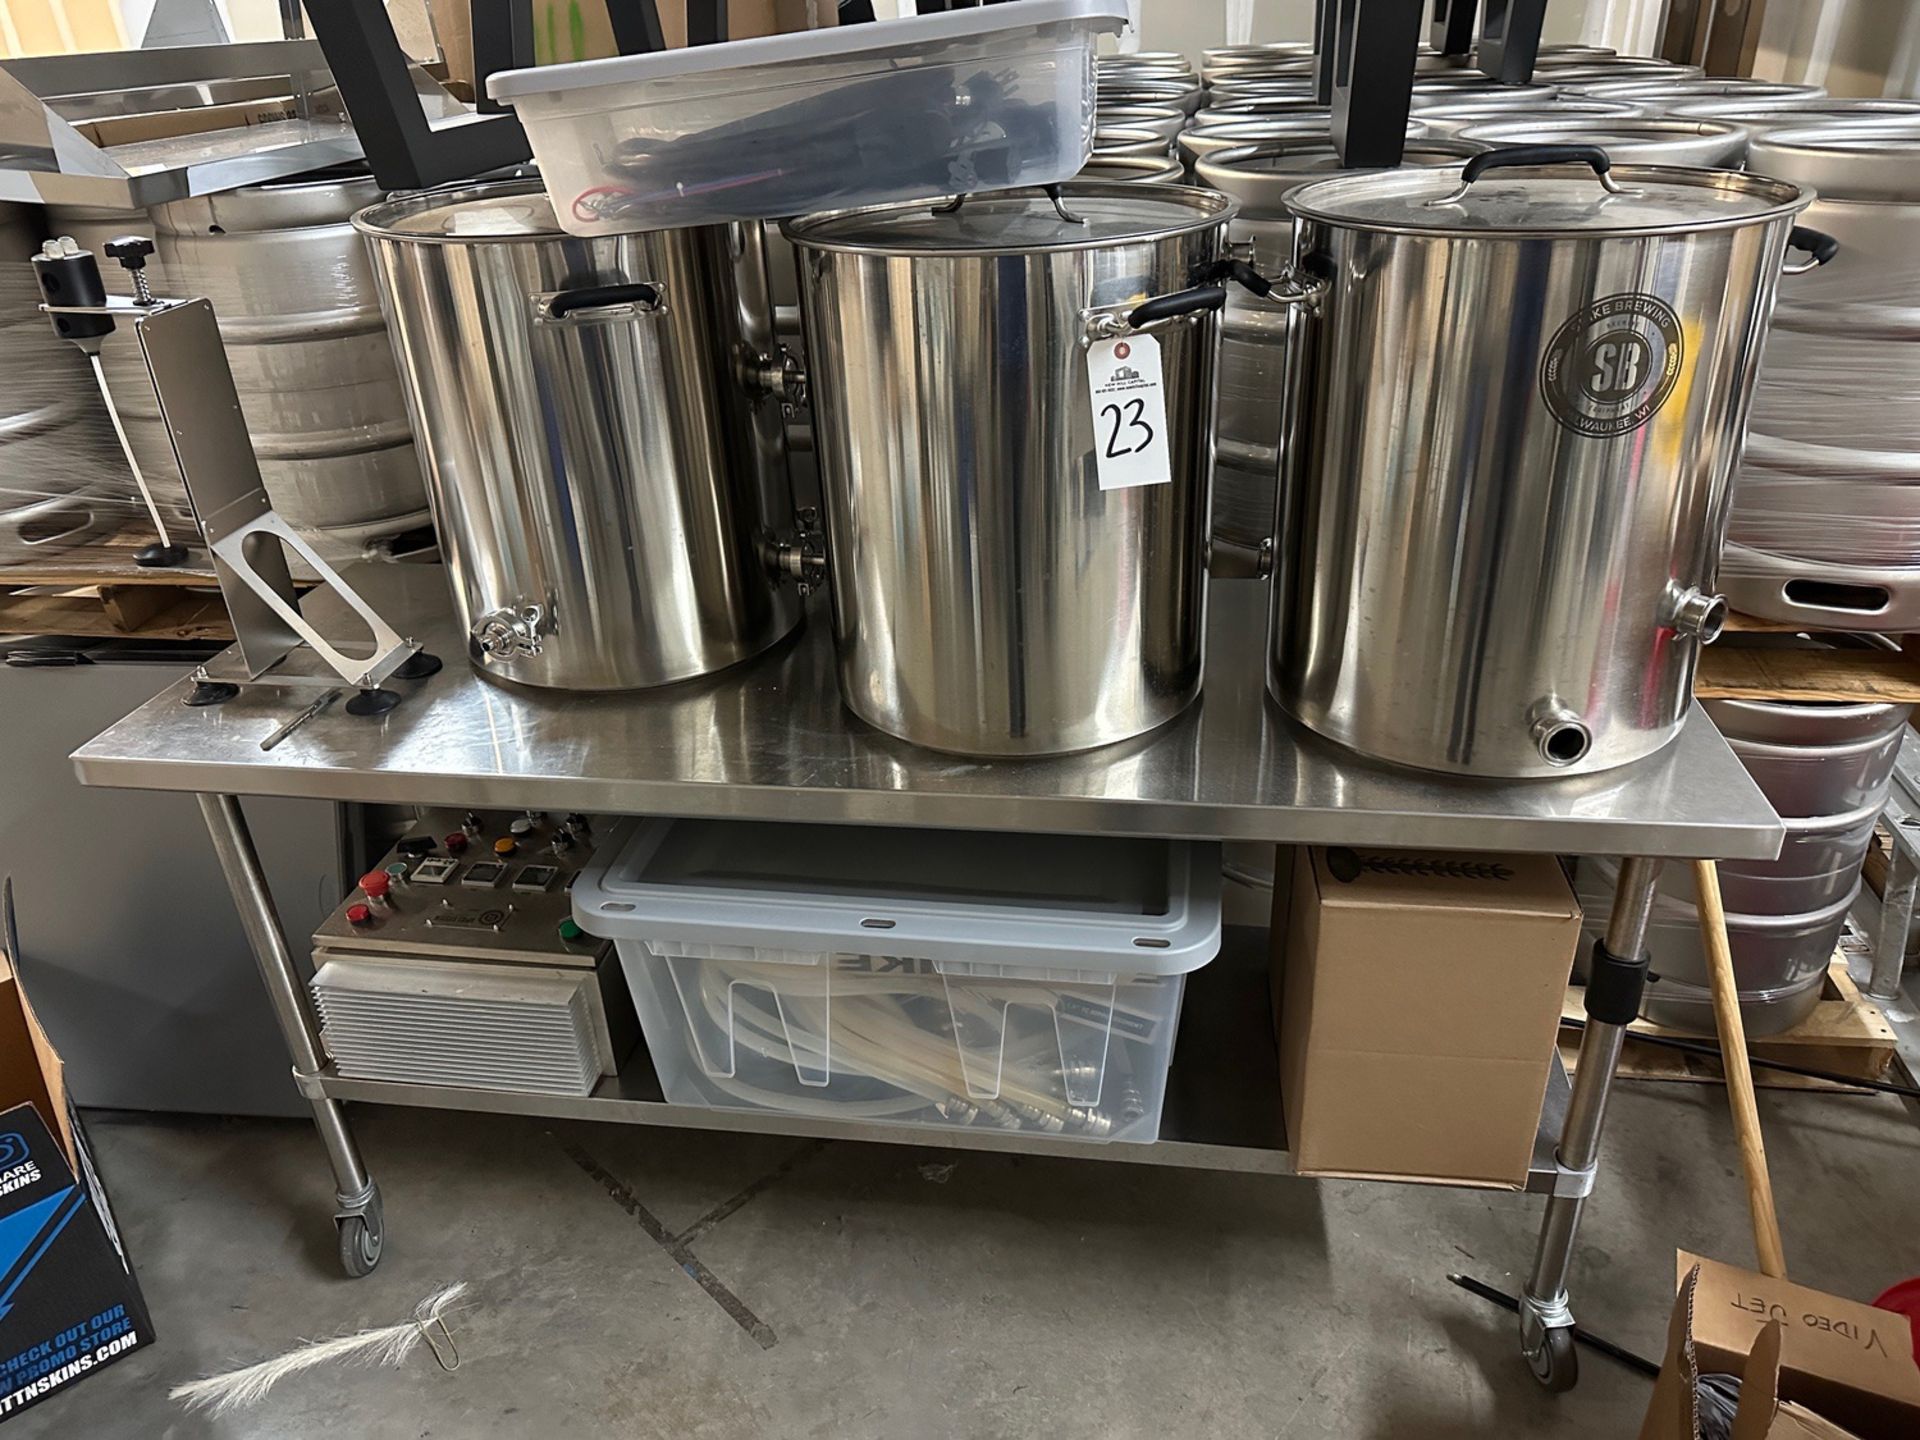 Spike Brewing Homebrew Setup on Stainless Steel Cart - 3-Vessels, Controls, Fittings and Hoses